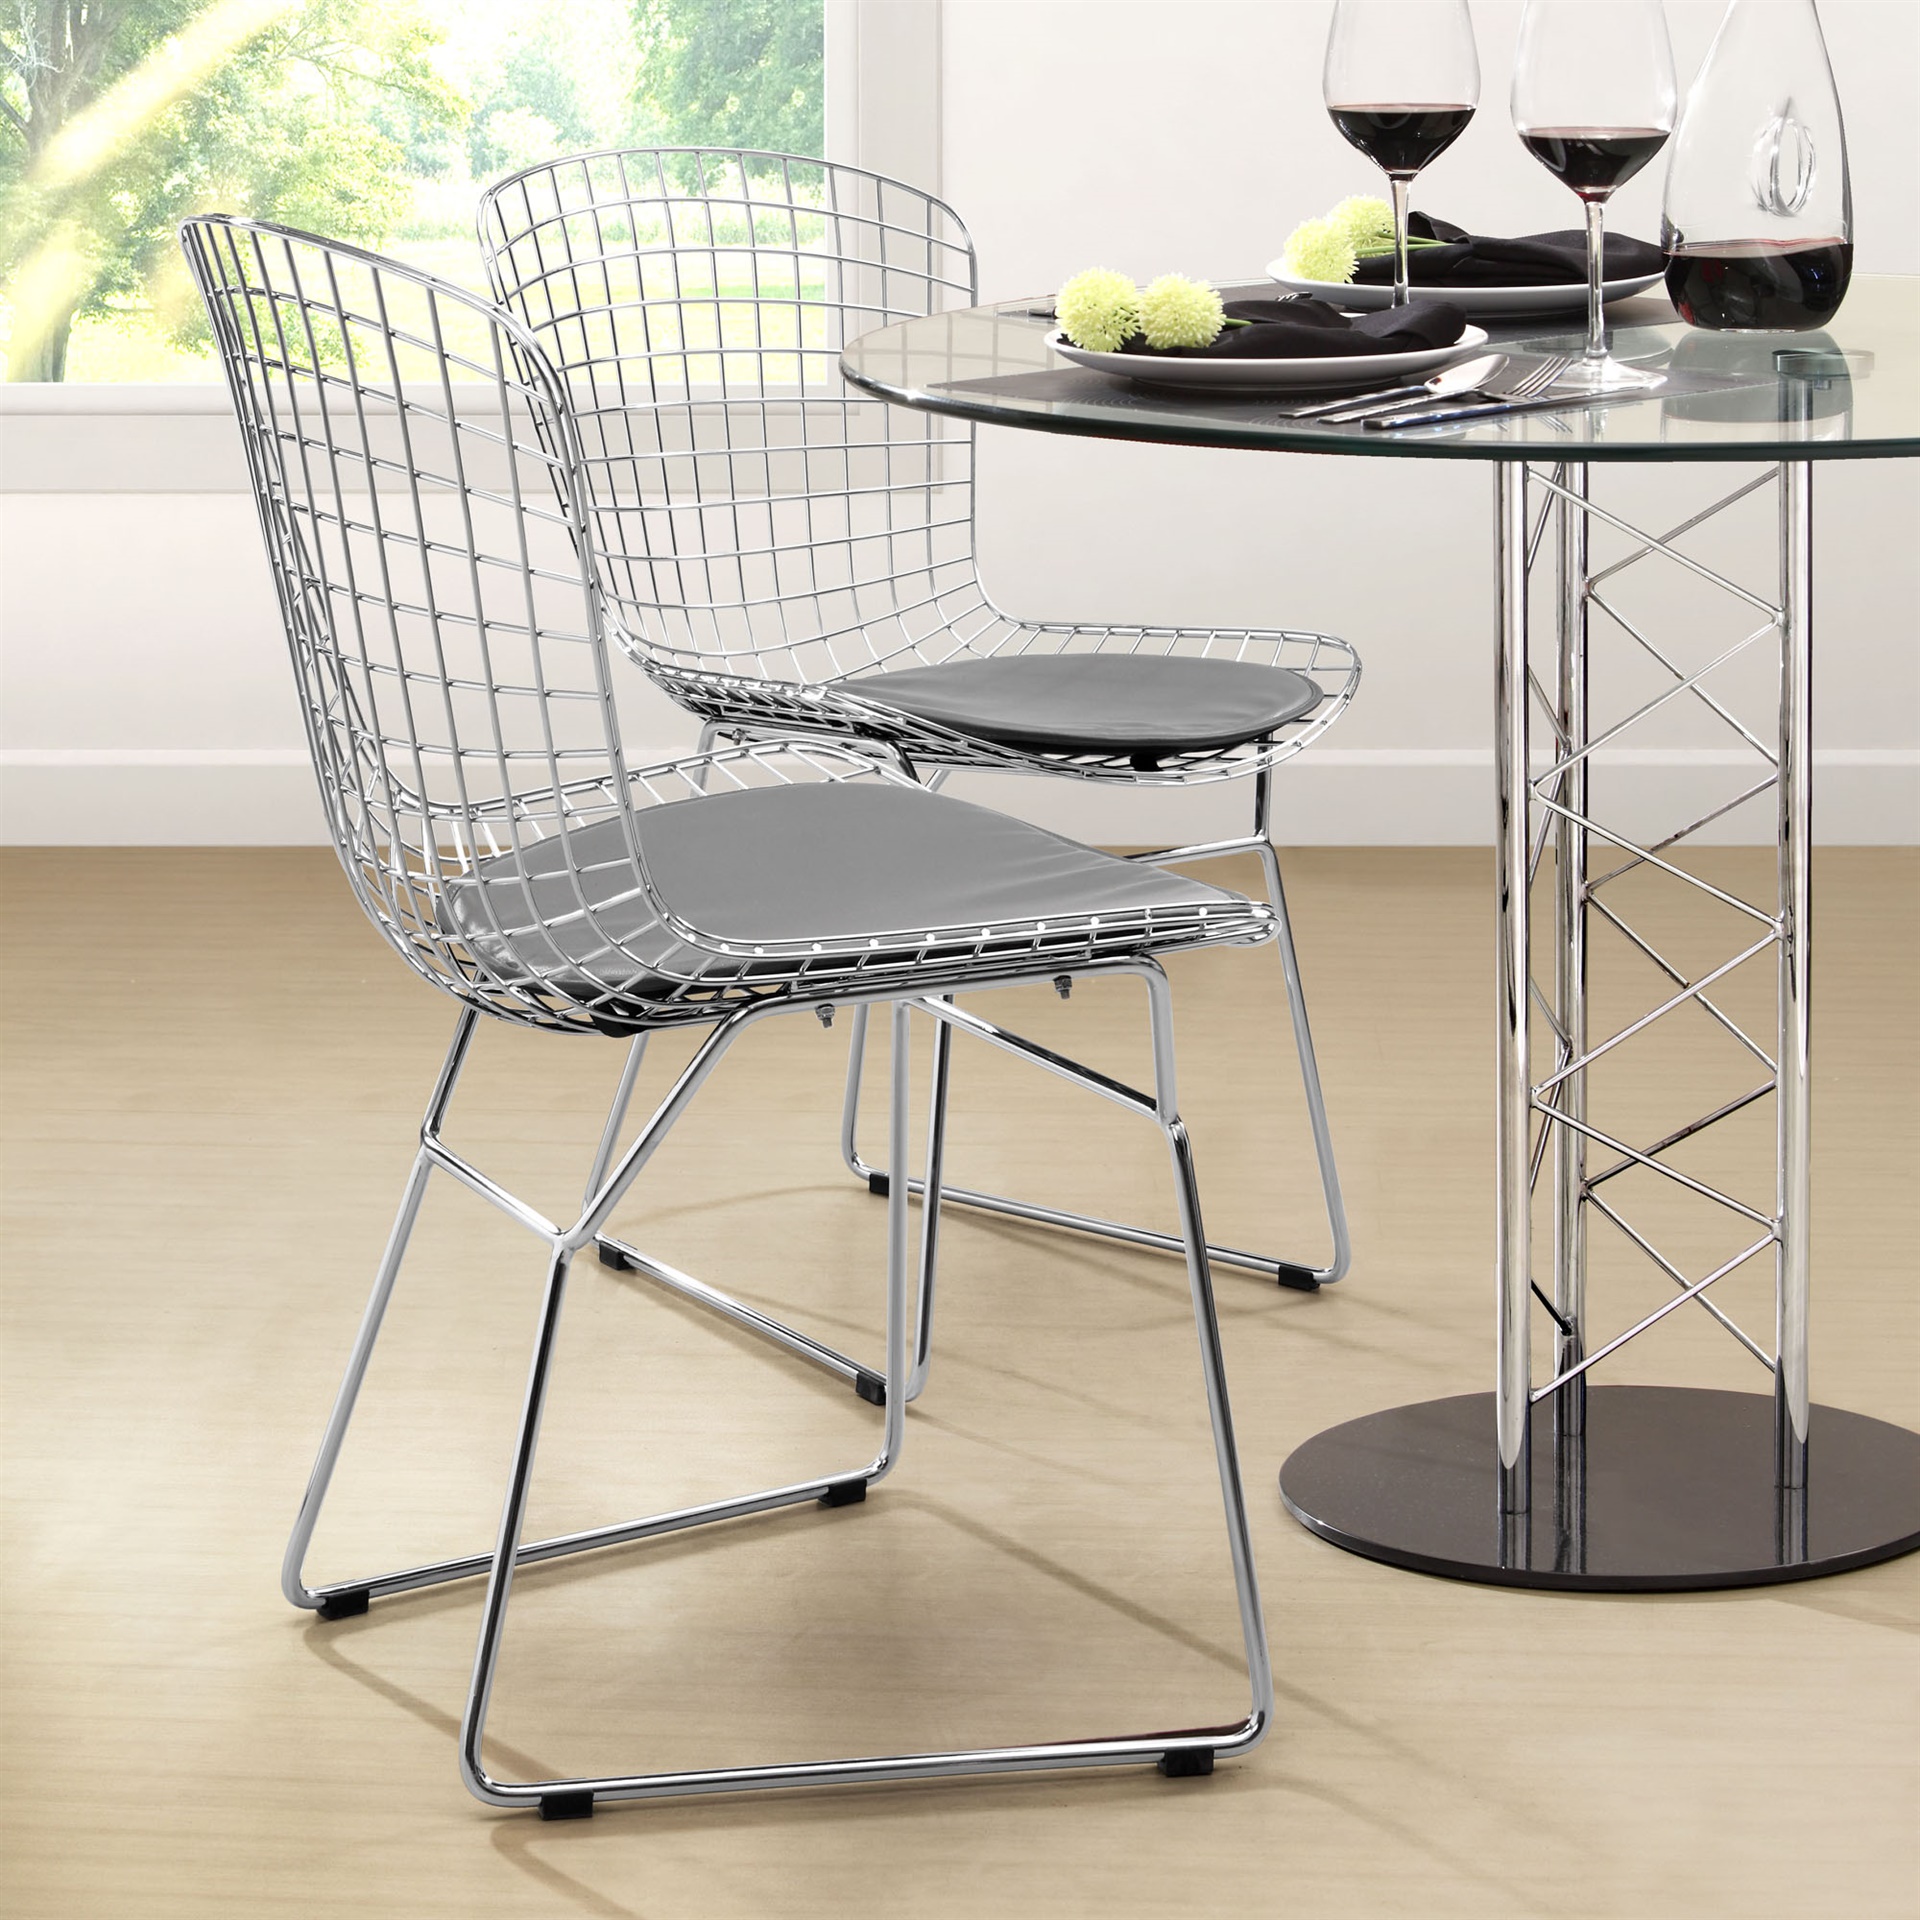 Make Your Dining Experience Comfortable With A Wire Dining Chair